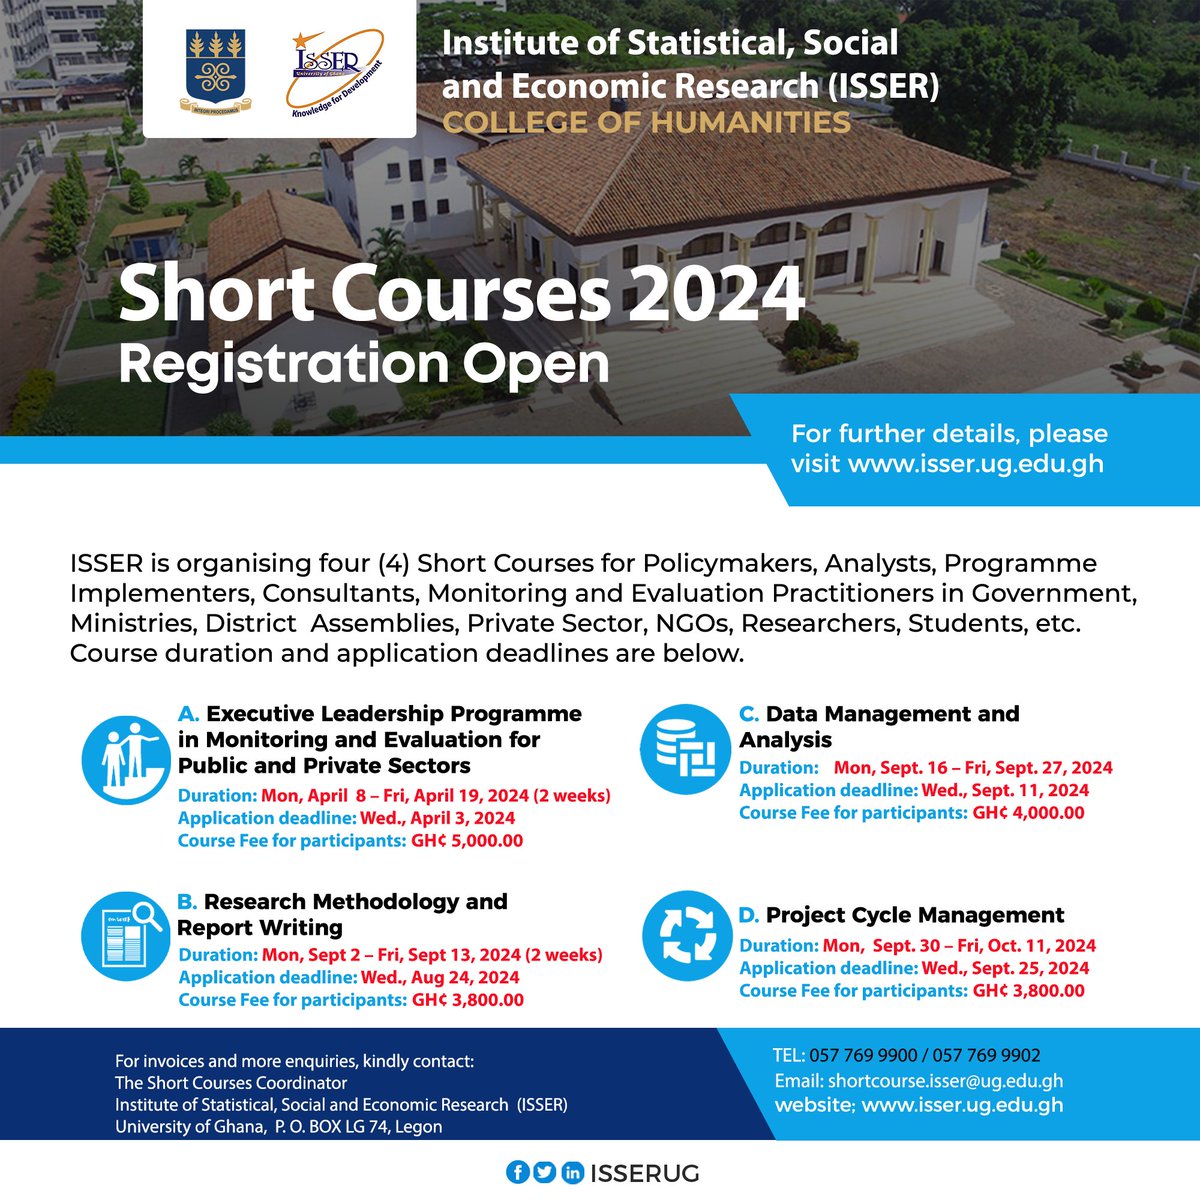 You spoke, we listened! 📣Thrilled to announce the fees for our short courses. Applications pouring in, so don't miss out. Register now for: 🔹 Executive Leadership Prog. in M&E 🔹 Research Methods & Report Writing 🔹 Data Mgt & Analysis 🔹 Project Cycle Mgt #ISSERShortCourses